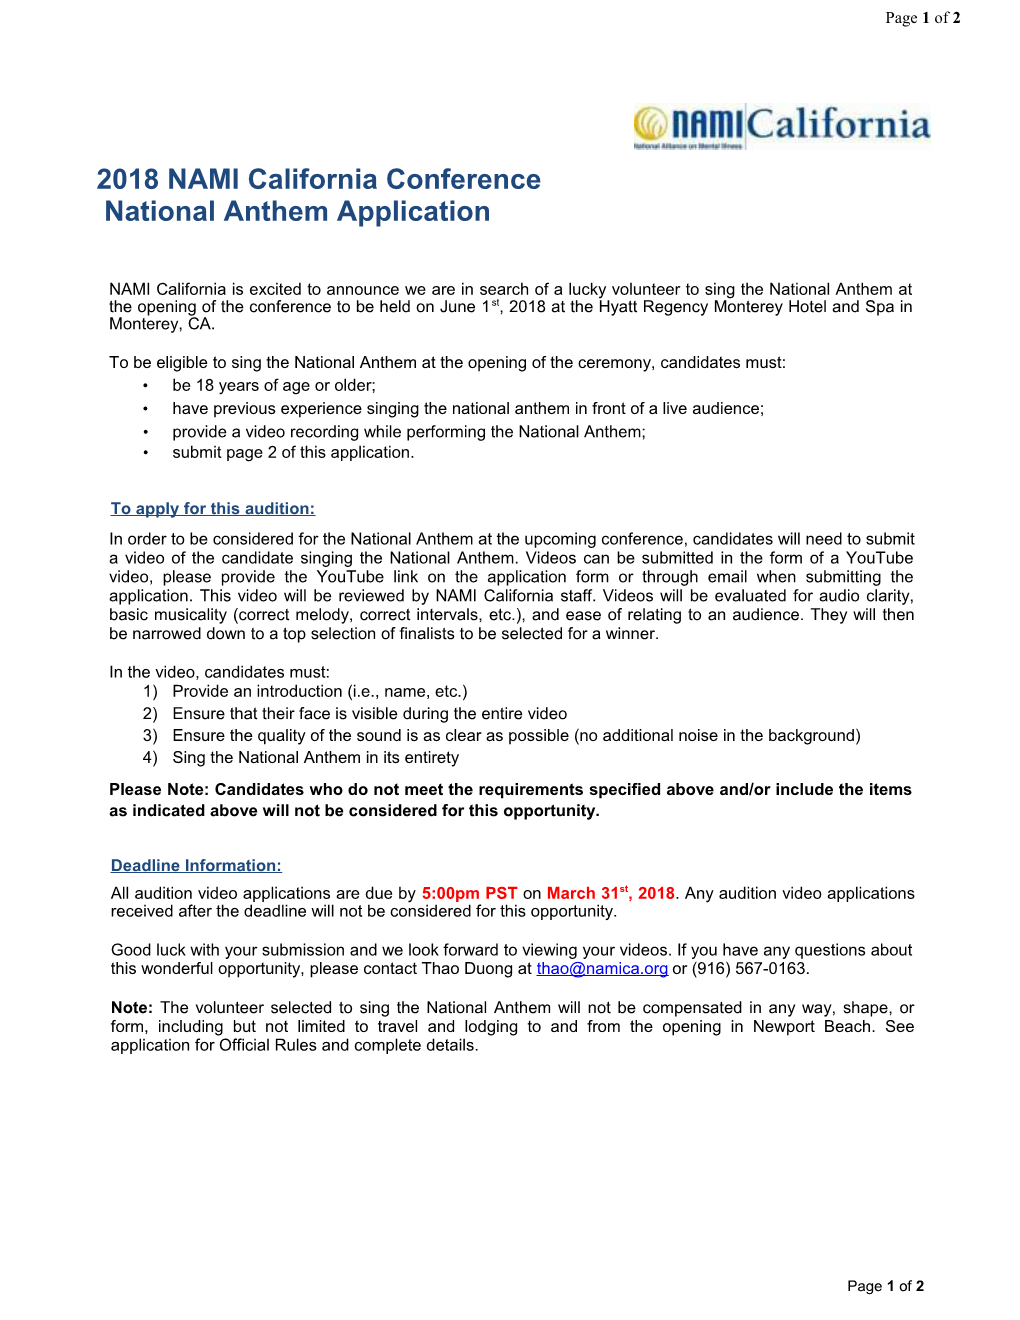 2018 NAMI California Conference National Anthem Application